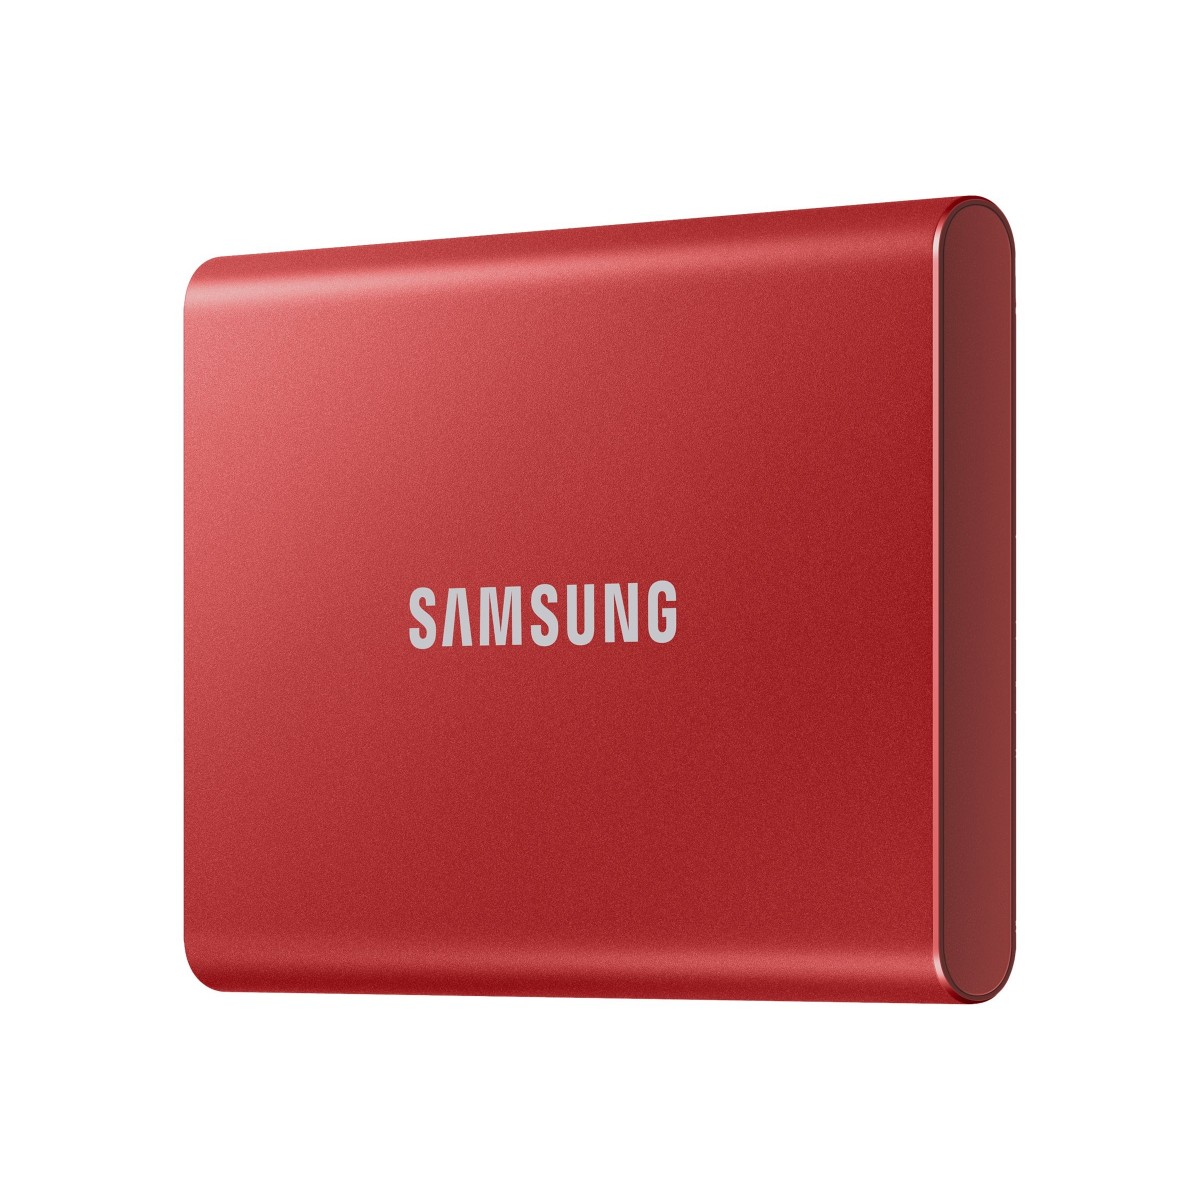 Samsung Portable SSD T7 - 2000 GB - USB Type-C - 3.2 Gen 2 (3.1 Gen 2) - 1050 MB/s - Password protection - Red